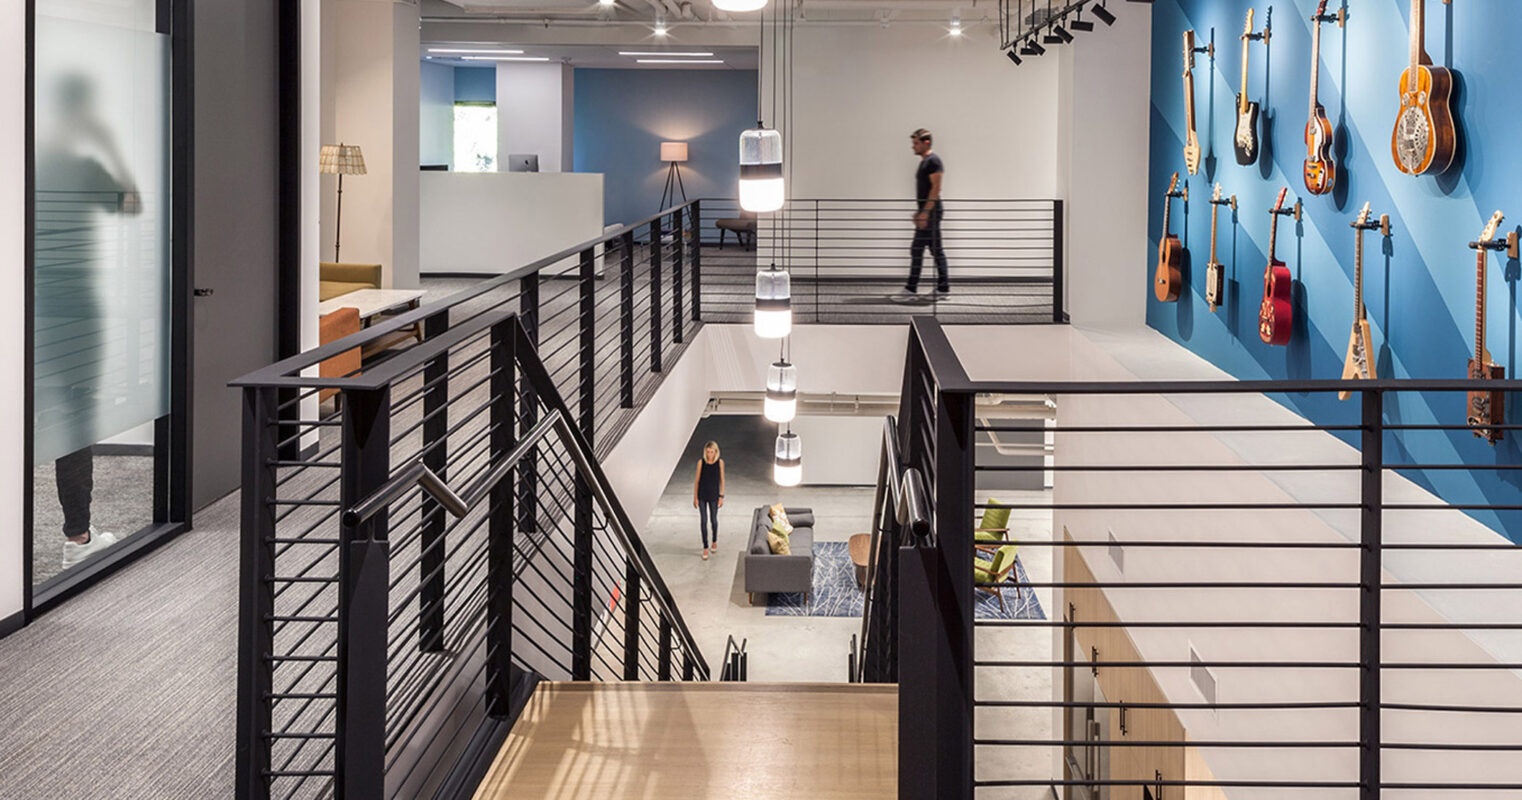 Modern office interior featuring a sleek black staircase with metal balusters, connecting two levels. White pendant lights illuminate the space, while a wall-mounted guitar collection adds a creative touch. Open floorplan with glass-partitioned rooms contributes to a spacious and collaborative environment.